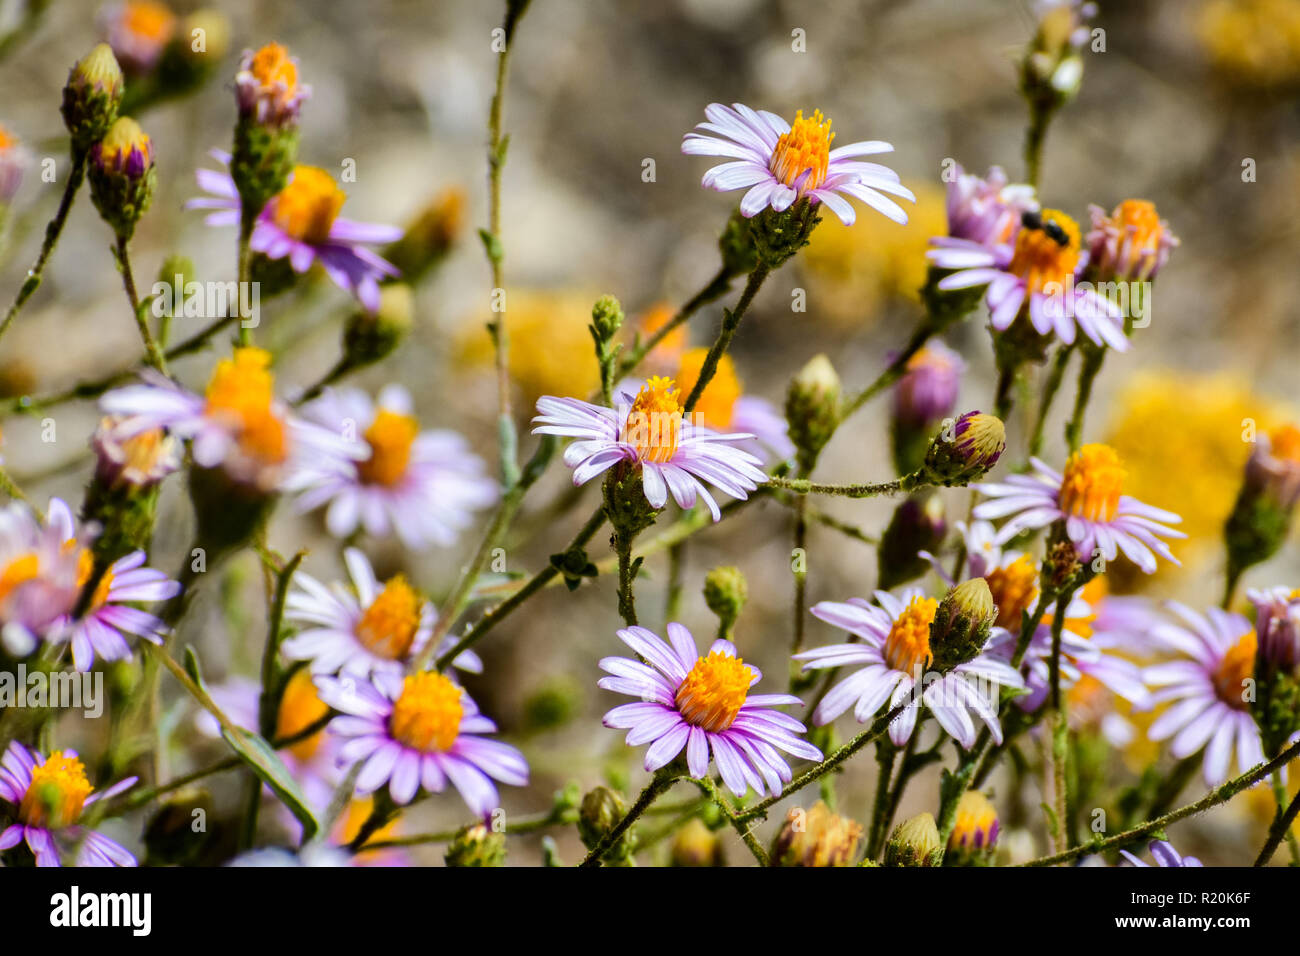 Brewer's fleabane (Erigeron breweri) wildflowers blooming at high altitude in Sequoia National Park, Sierra Nevada mountains, south California Stock Photo